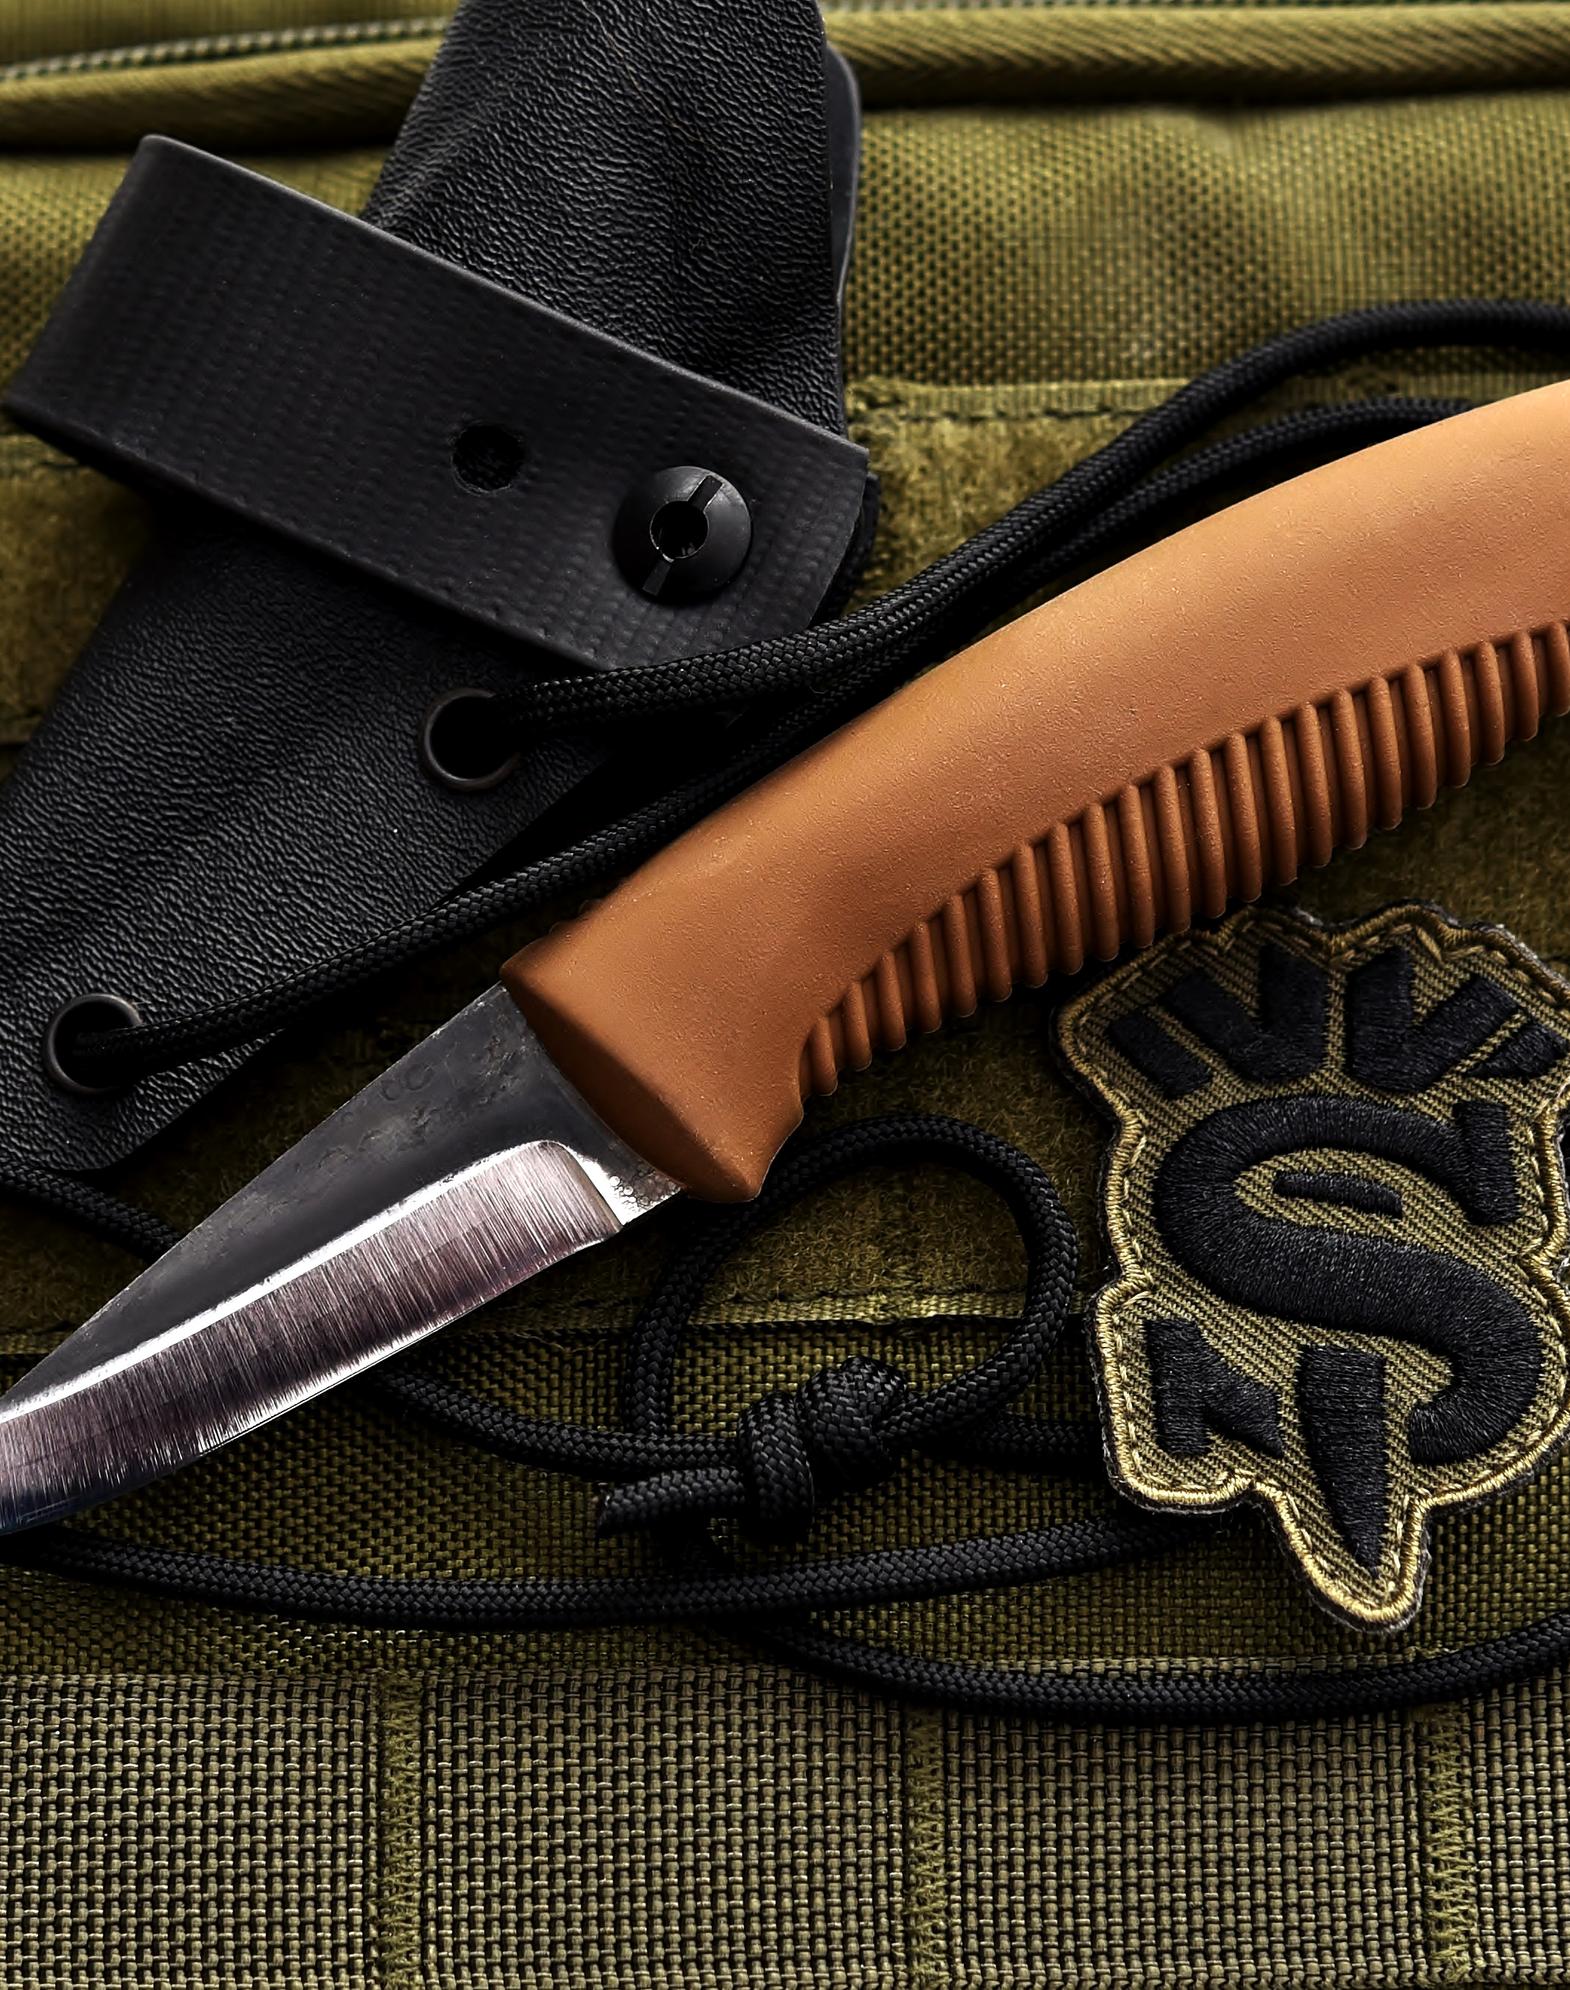 M23 - Light and ergonomic knife. Ideal to carry around your neck.